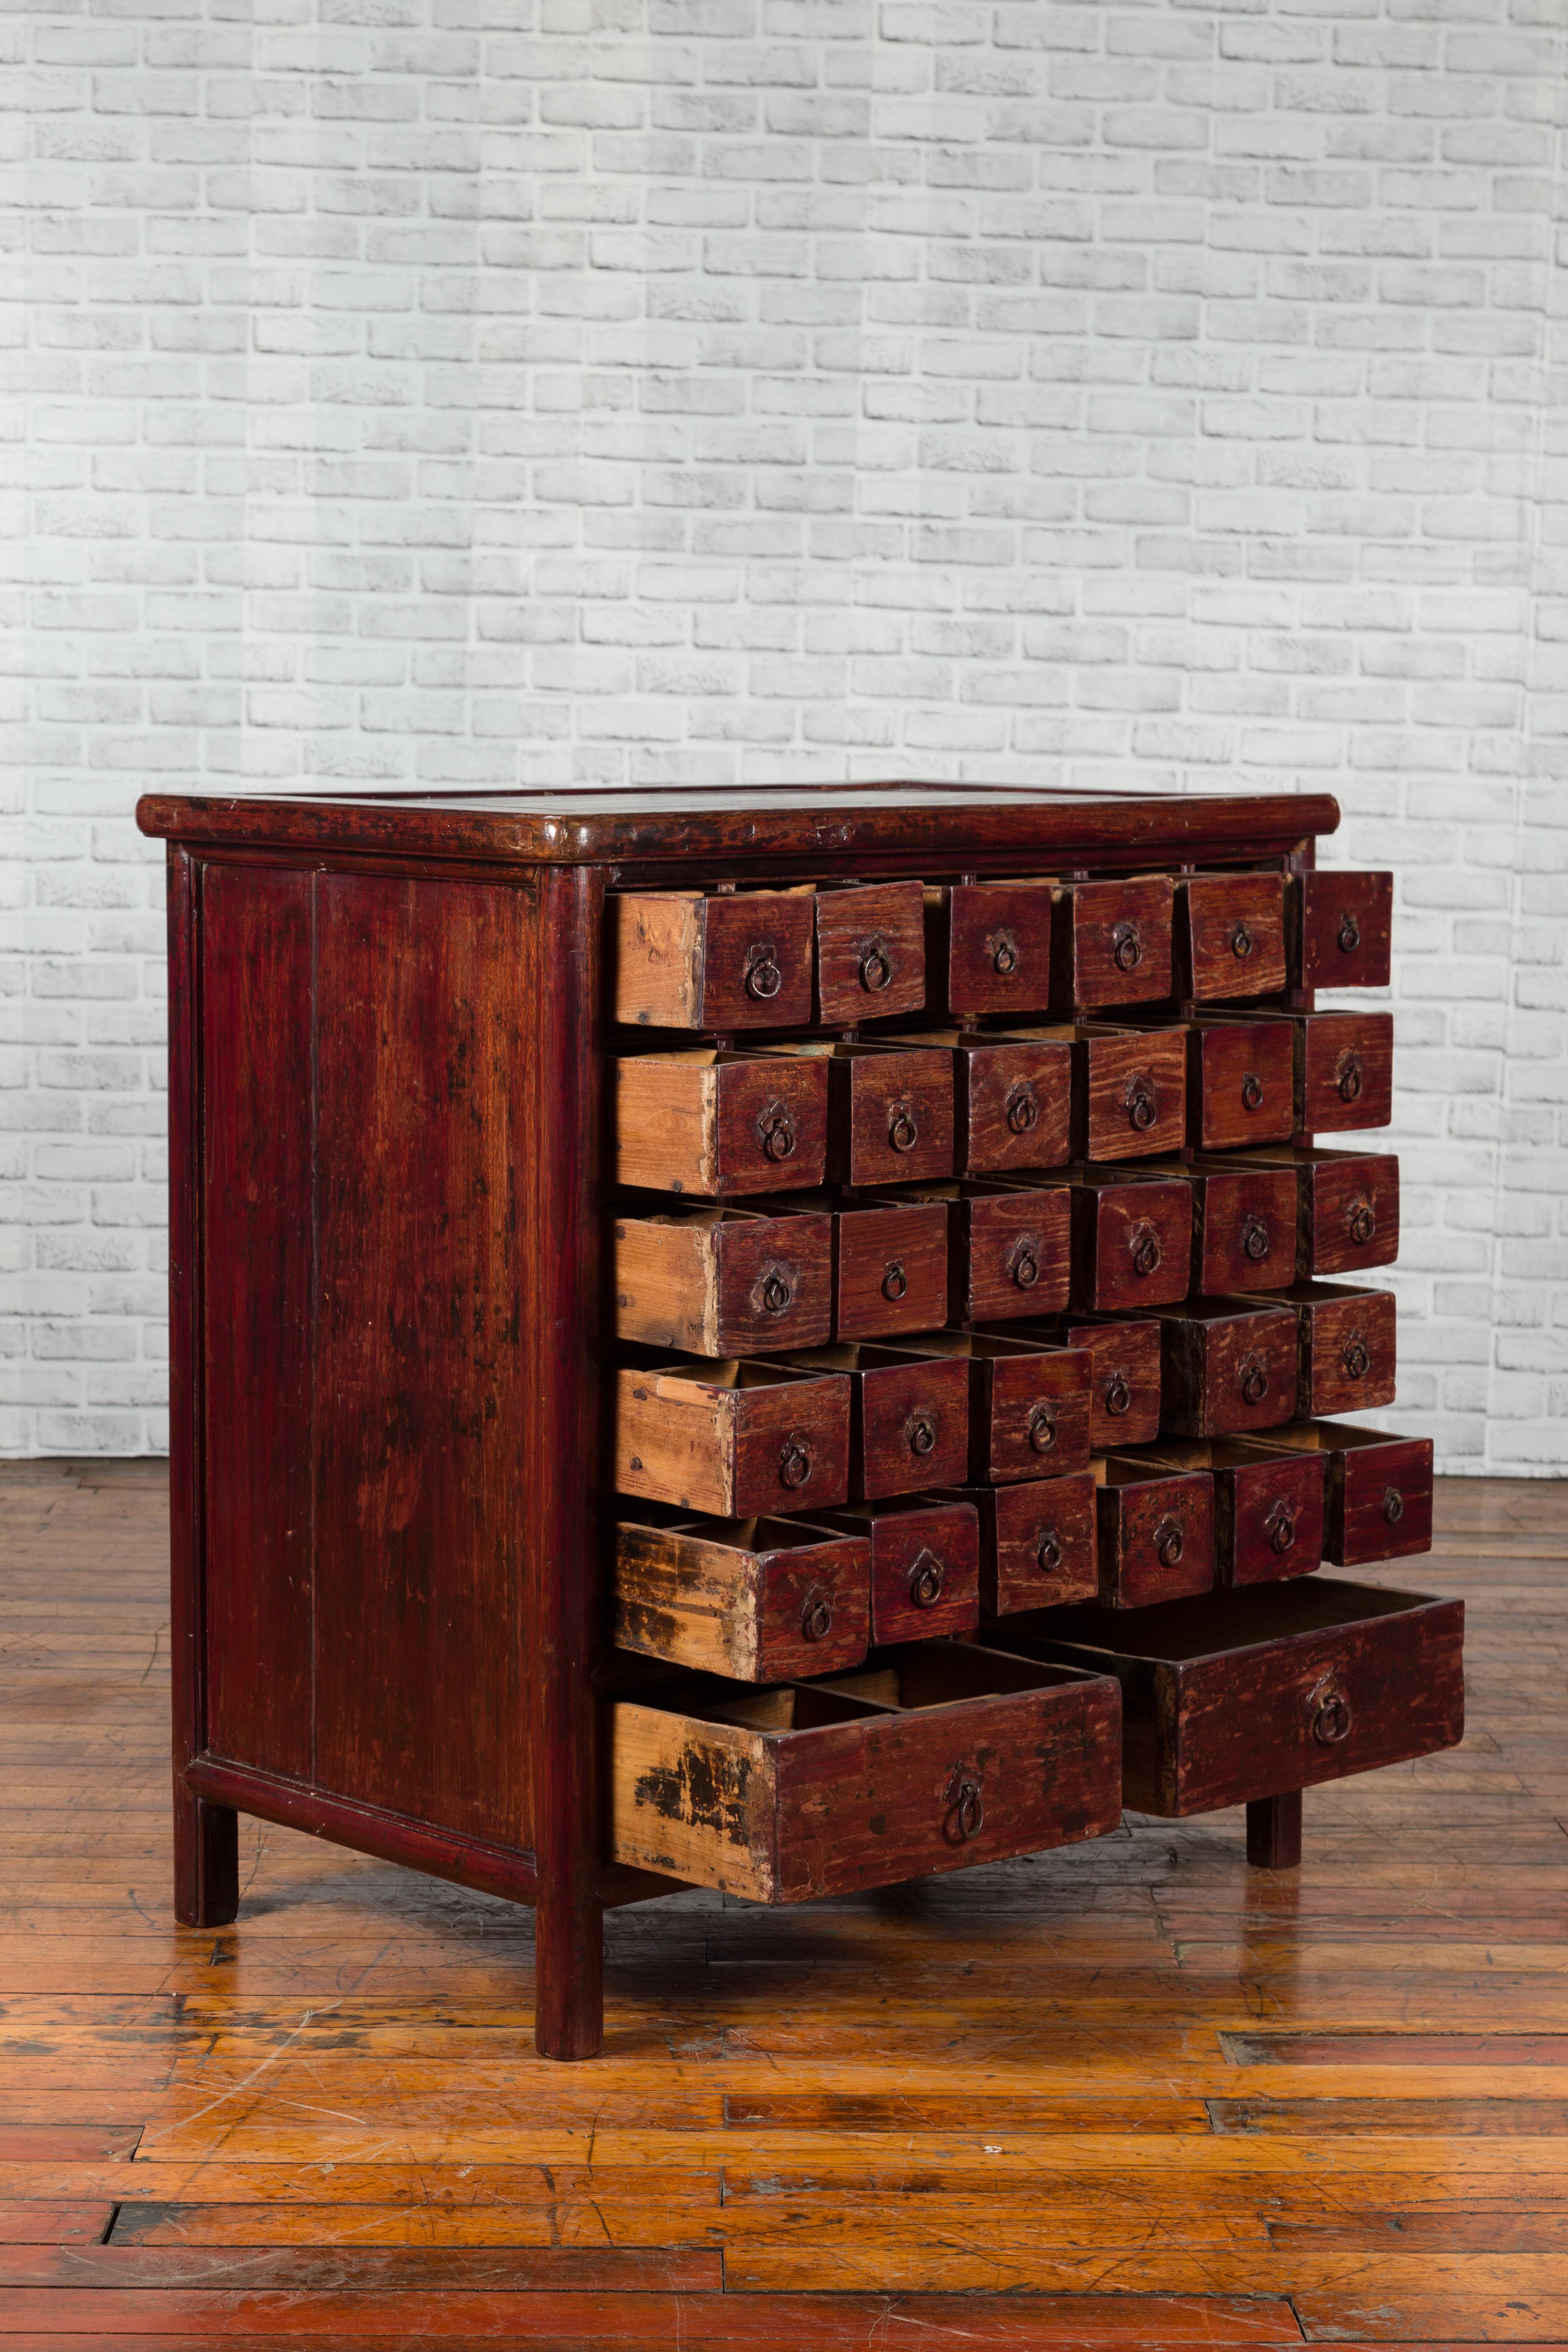 Chinese Qing Dynasty Period Apothecary Chest with 32 Drawers and Aged Patina In Good Condition For Sale In Yonkers, NY